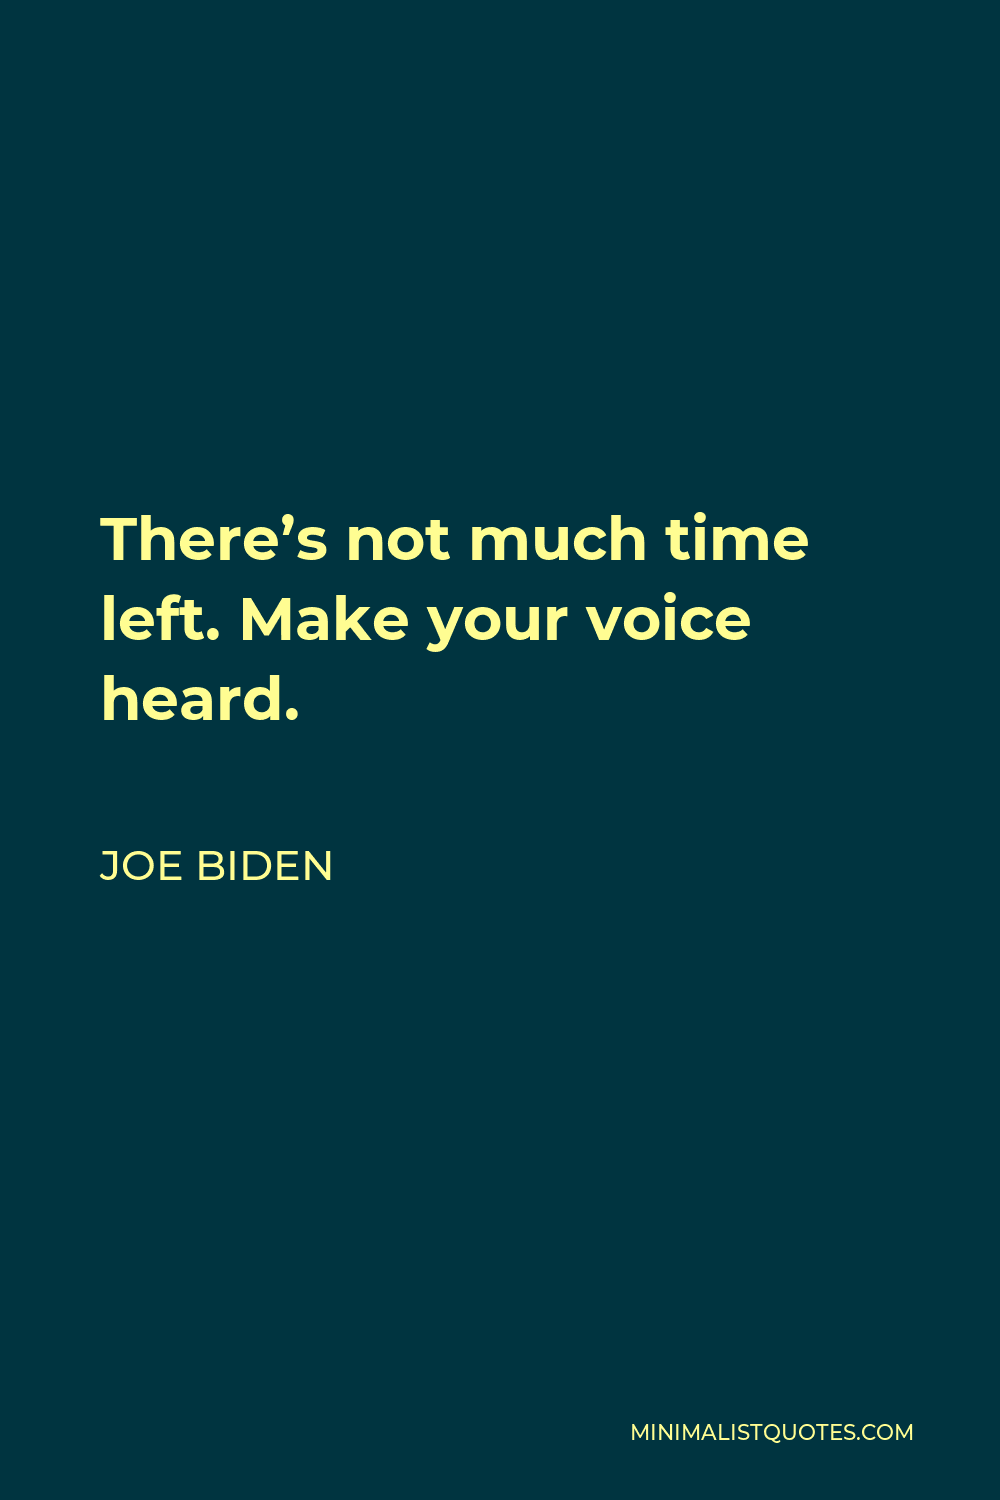 Joe Biden Quote - There’s not much time left. Make your voice heard.